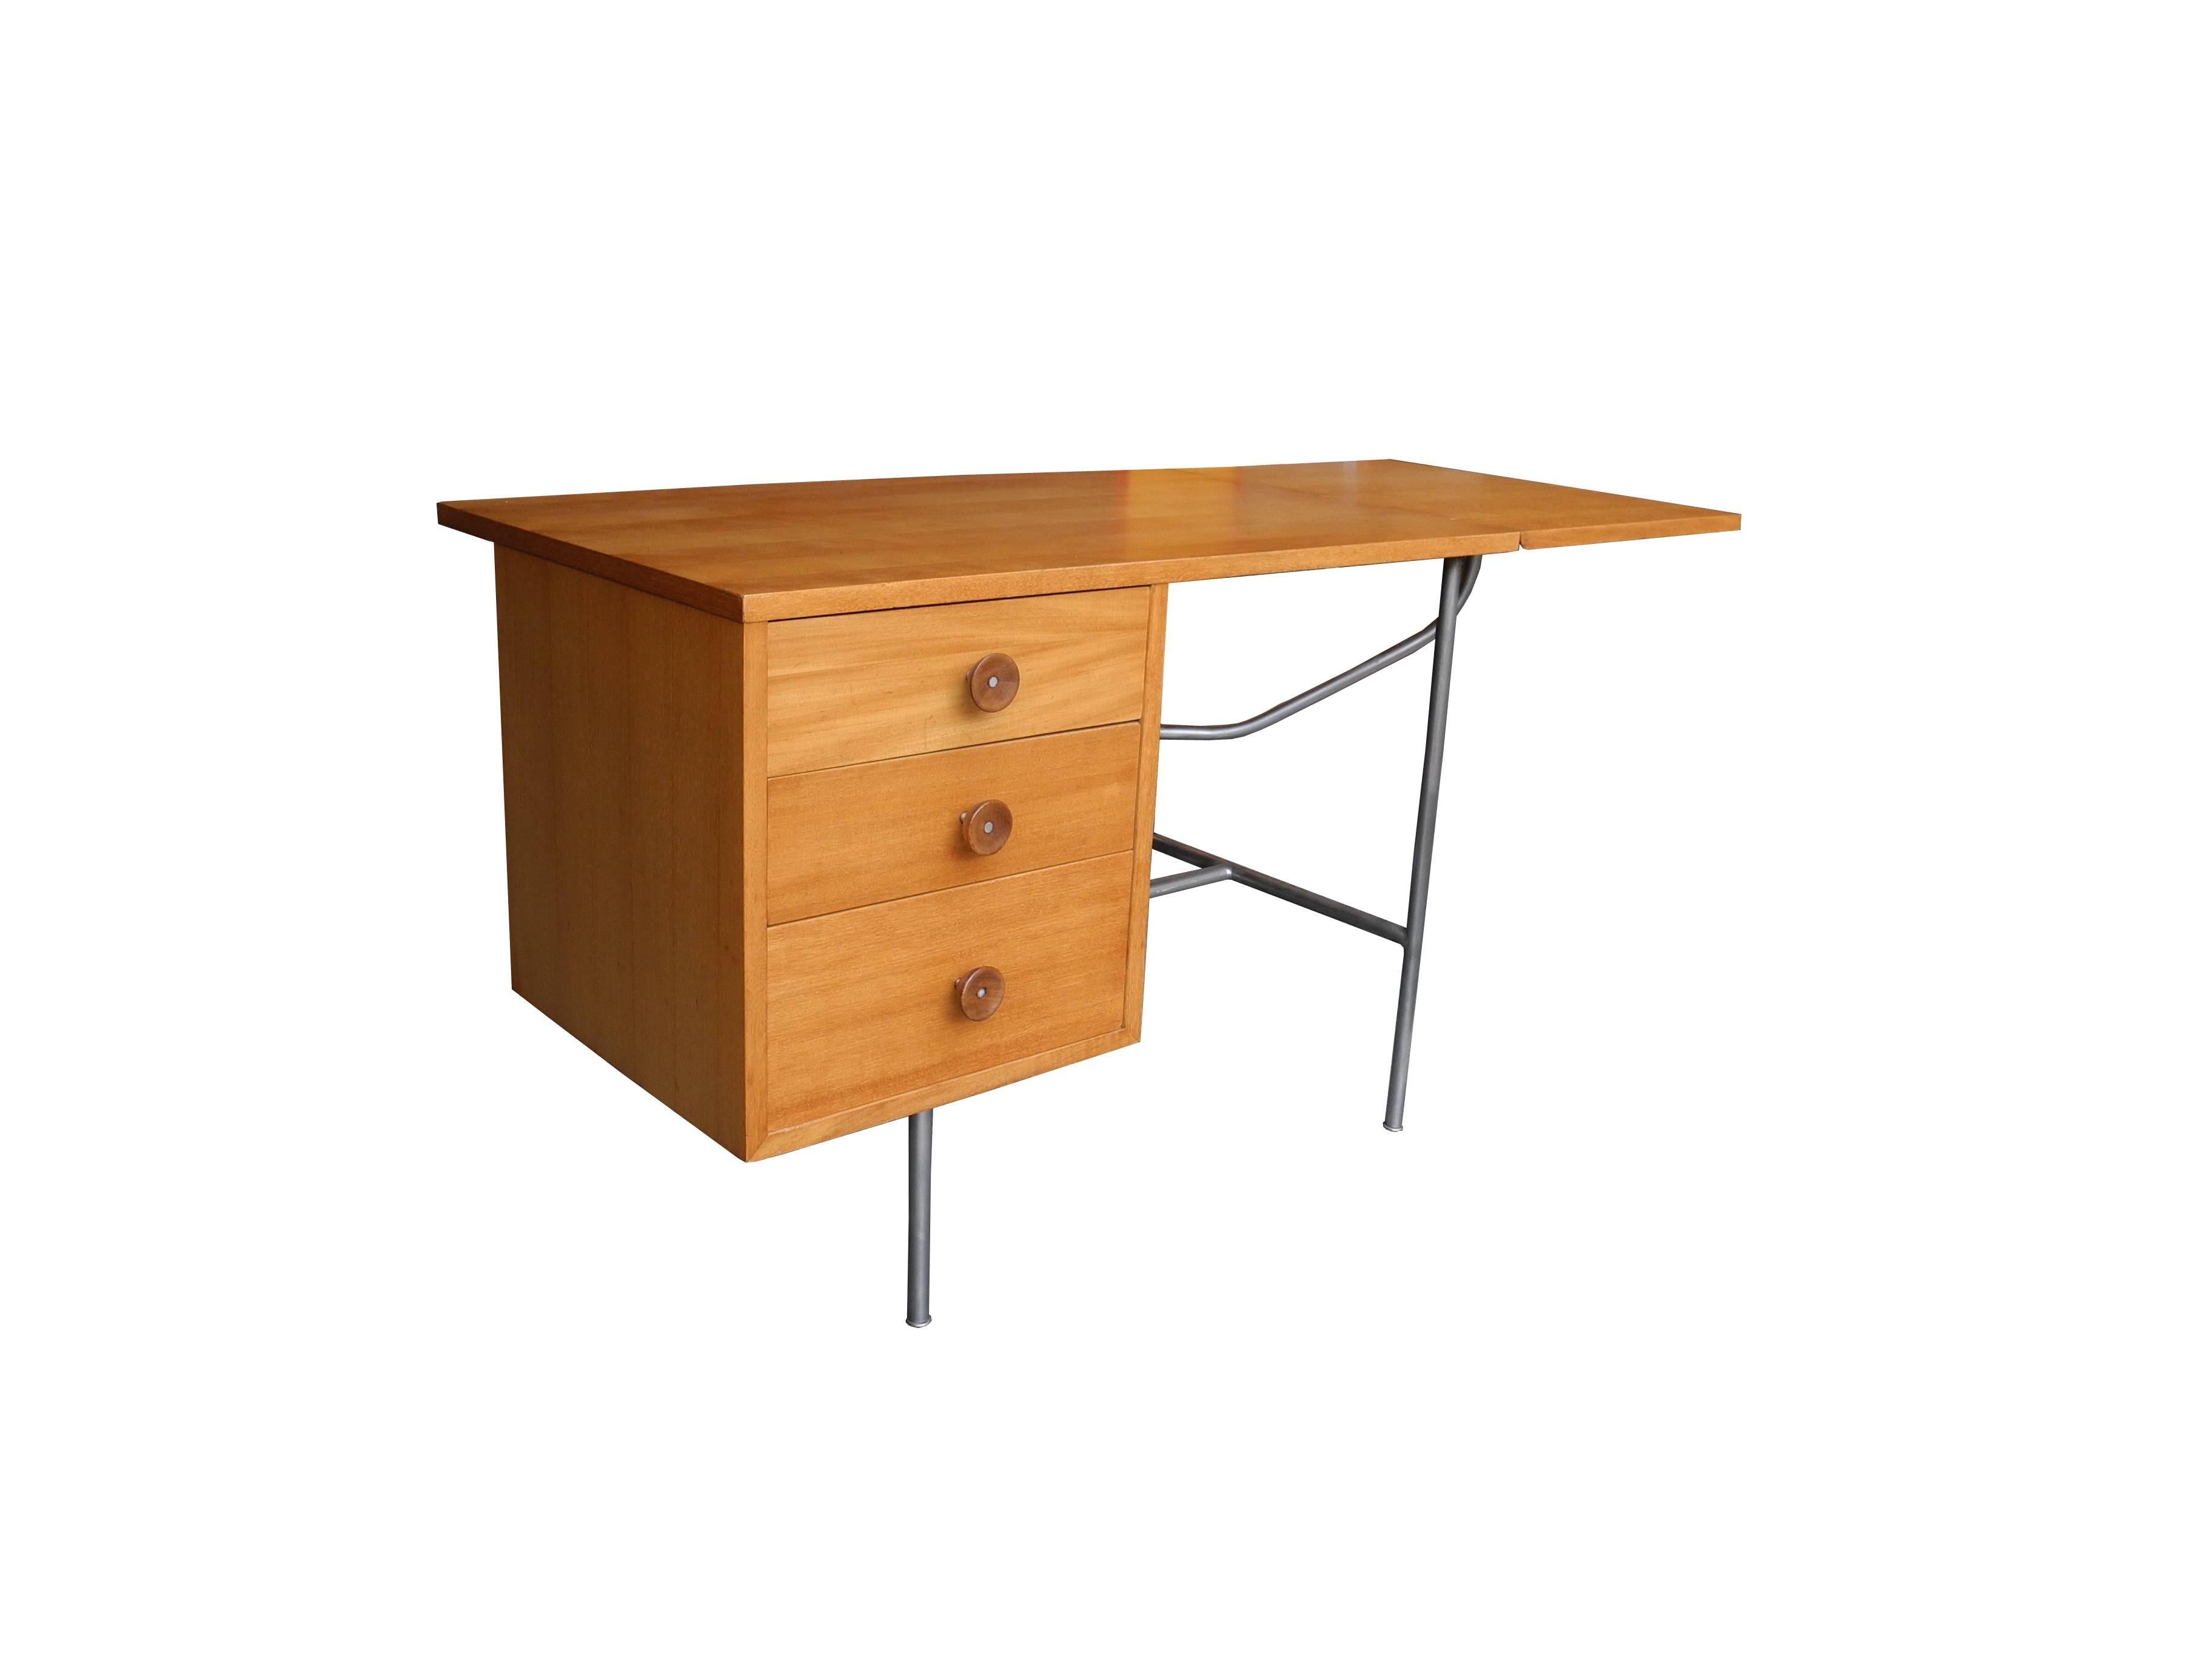 This beautiful blonde bleached mahogany desk with a tubular metal frame is equipped with a flip down extension. Three left hand drawers with the iconic cupcake handles makes the George Nelson desk complete.